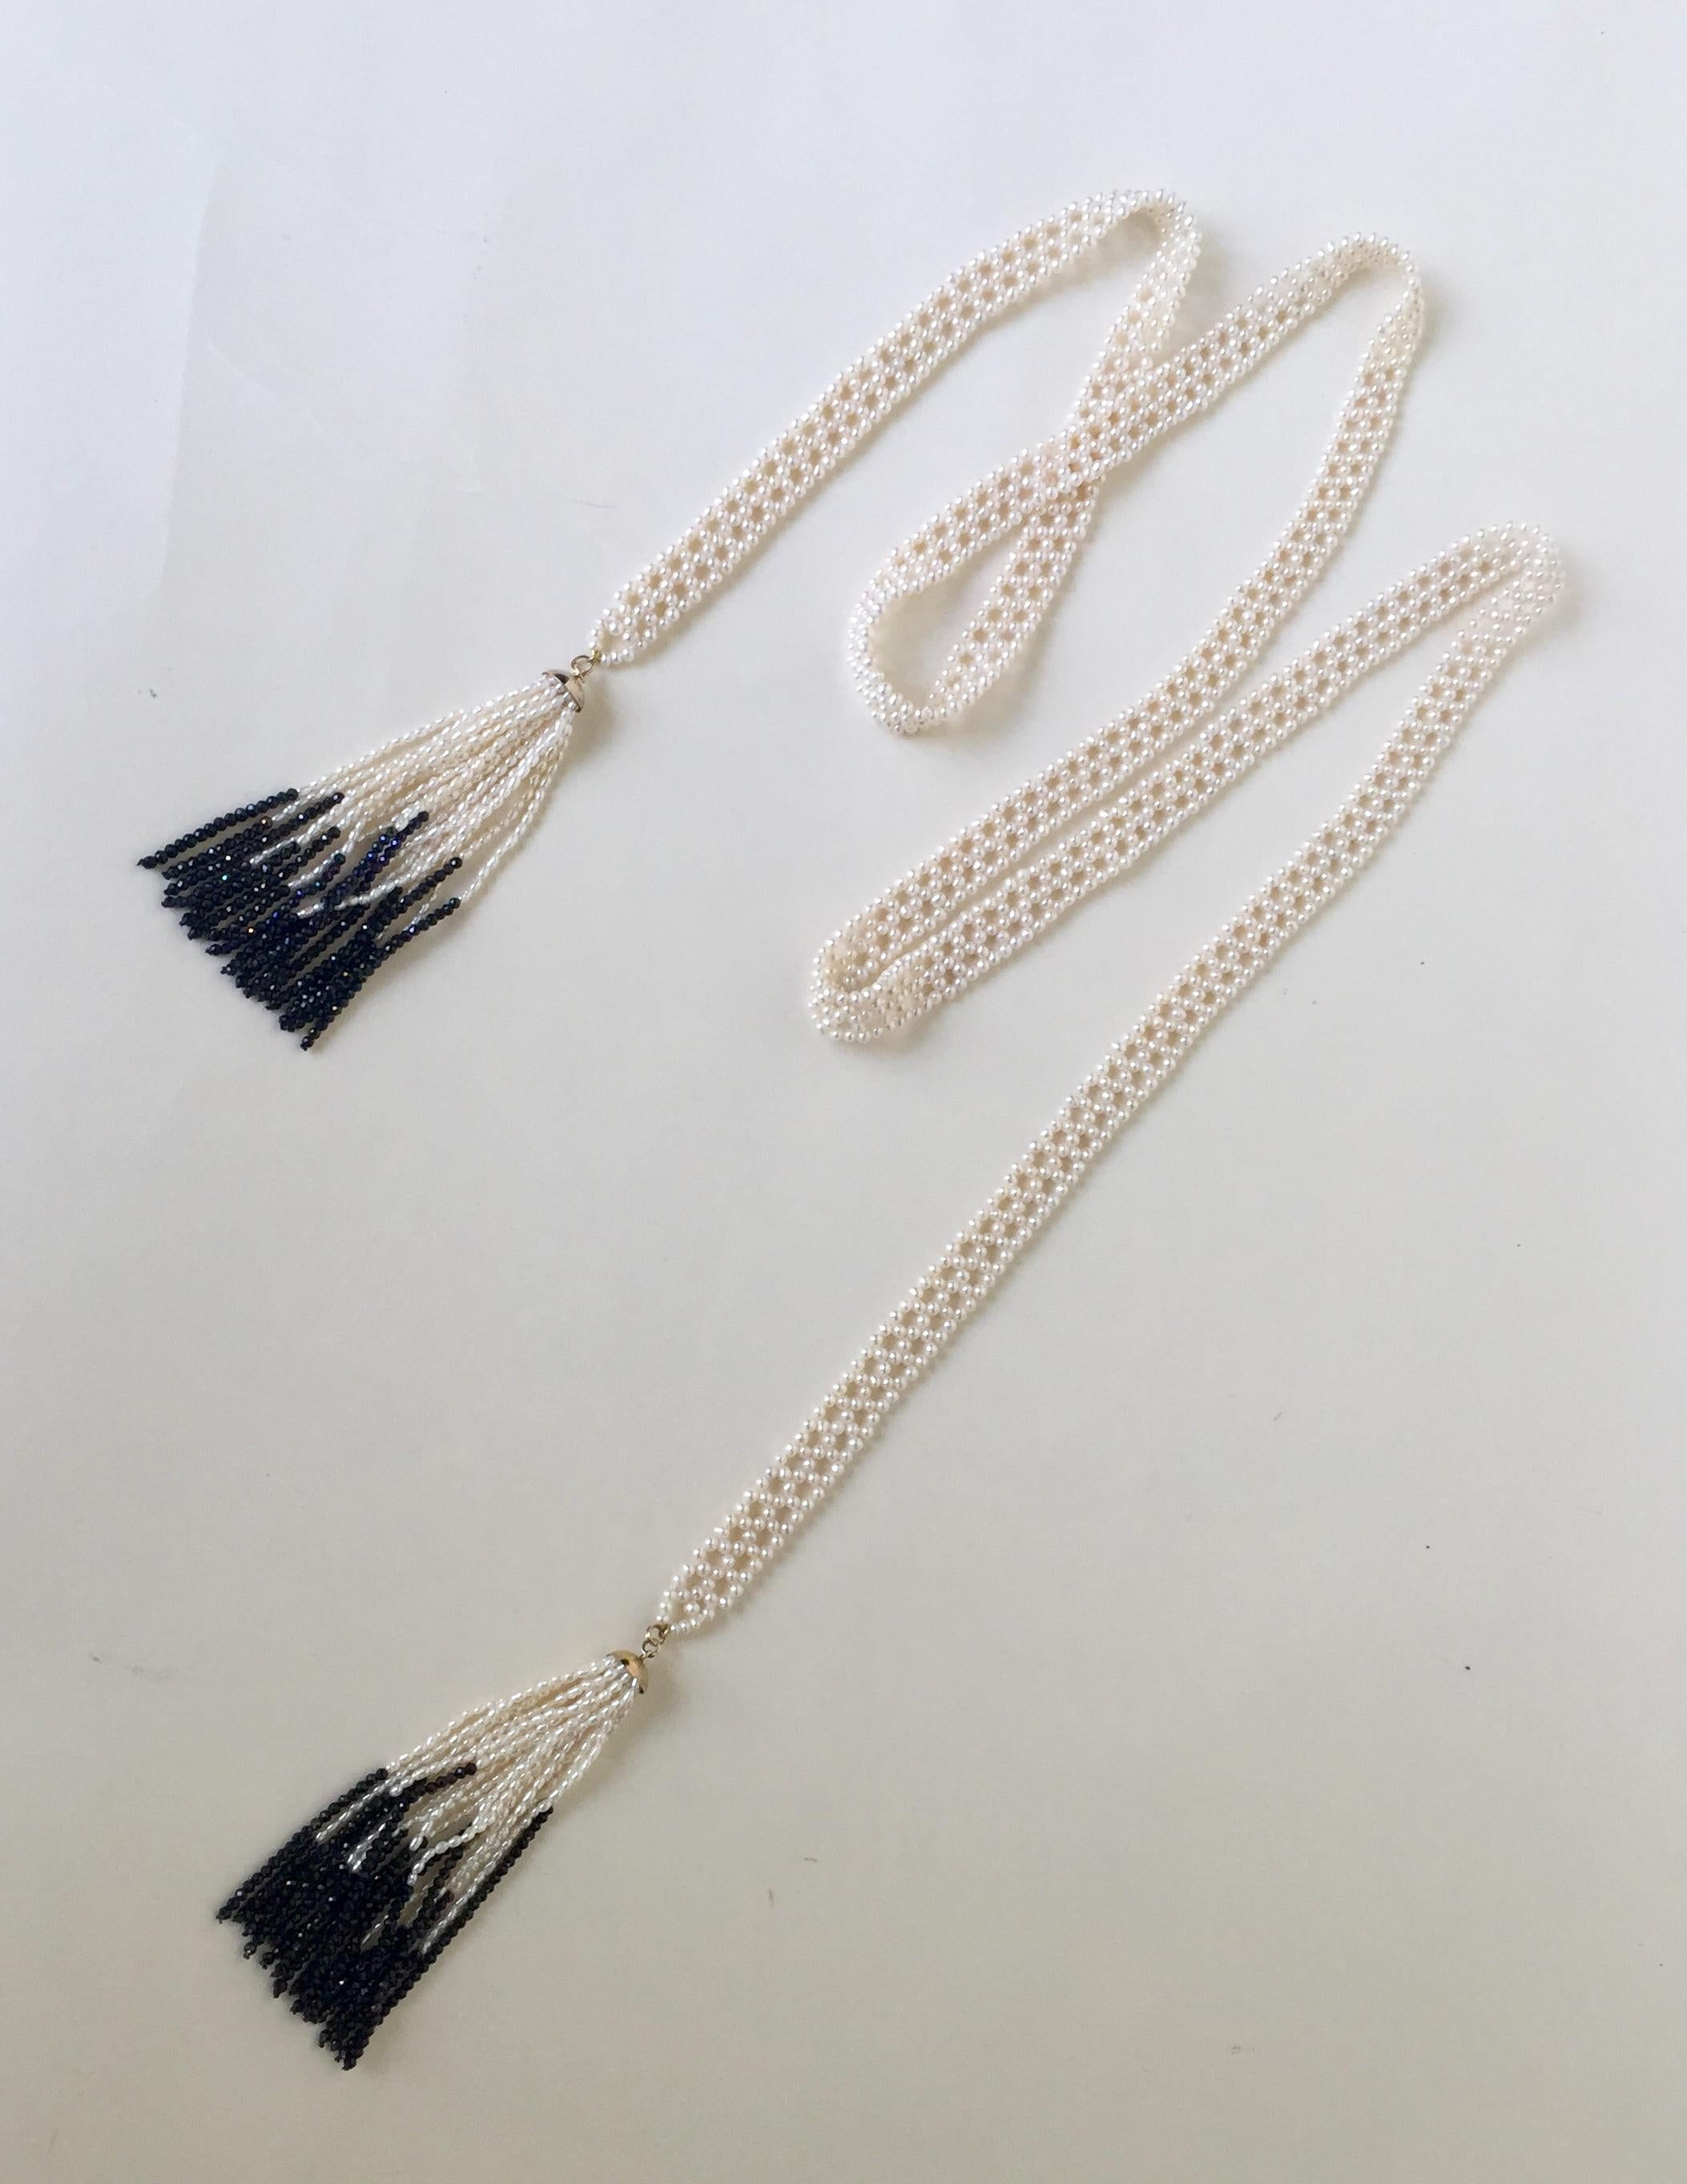 Woven White Pearl Sautoir with 14 Karat Gold, Pearl, and Black Spinel Tassels 2